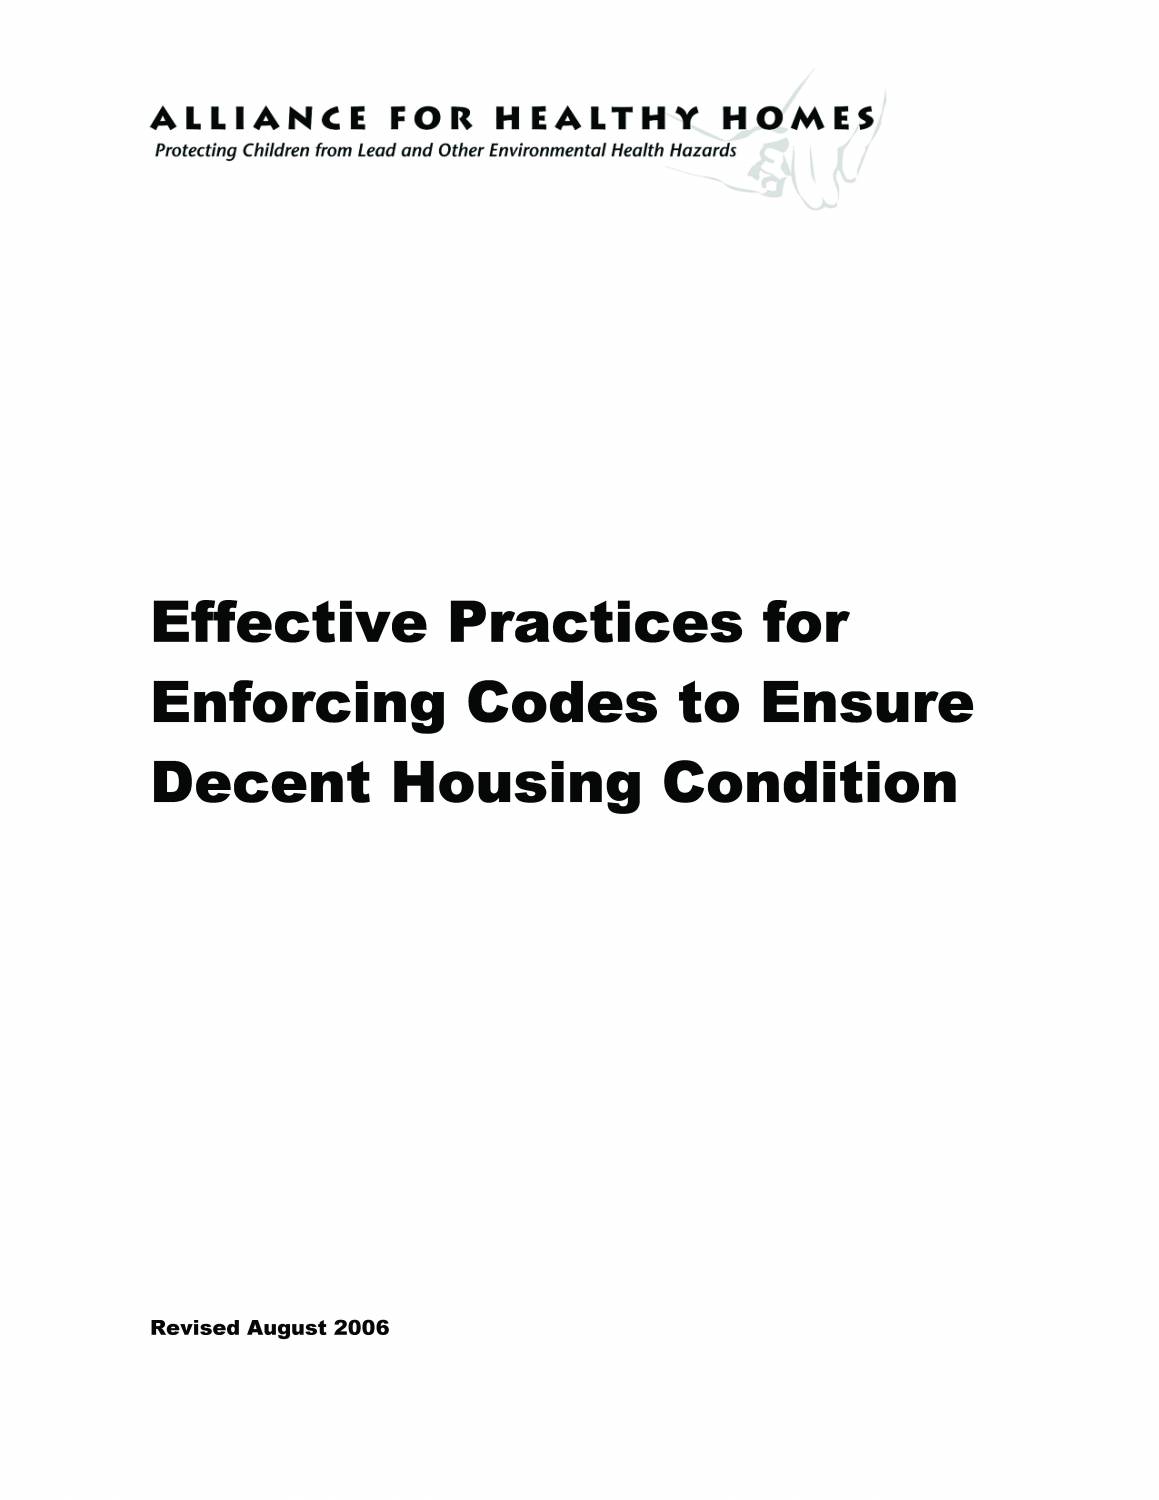 Effective Practices for Enforcing Codes to Ensure Decent Housing Condition (Revised August 2006)